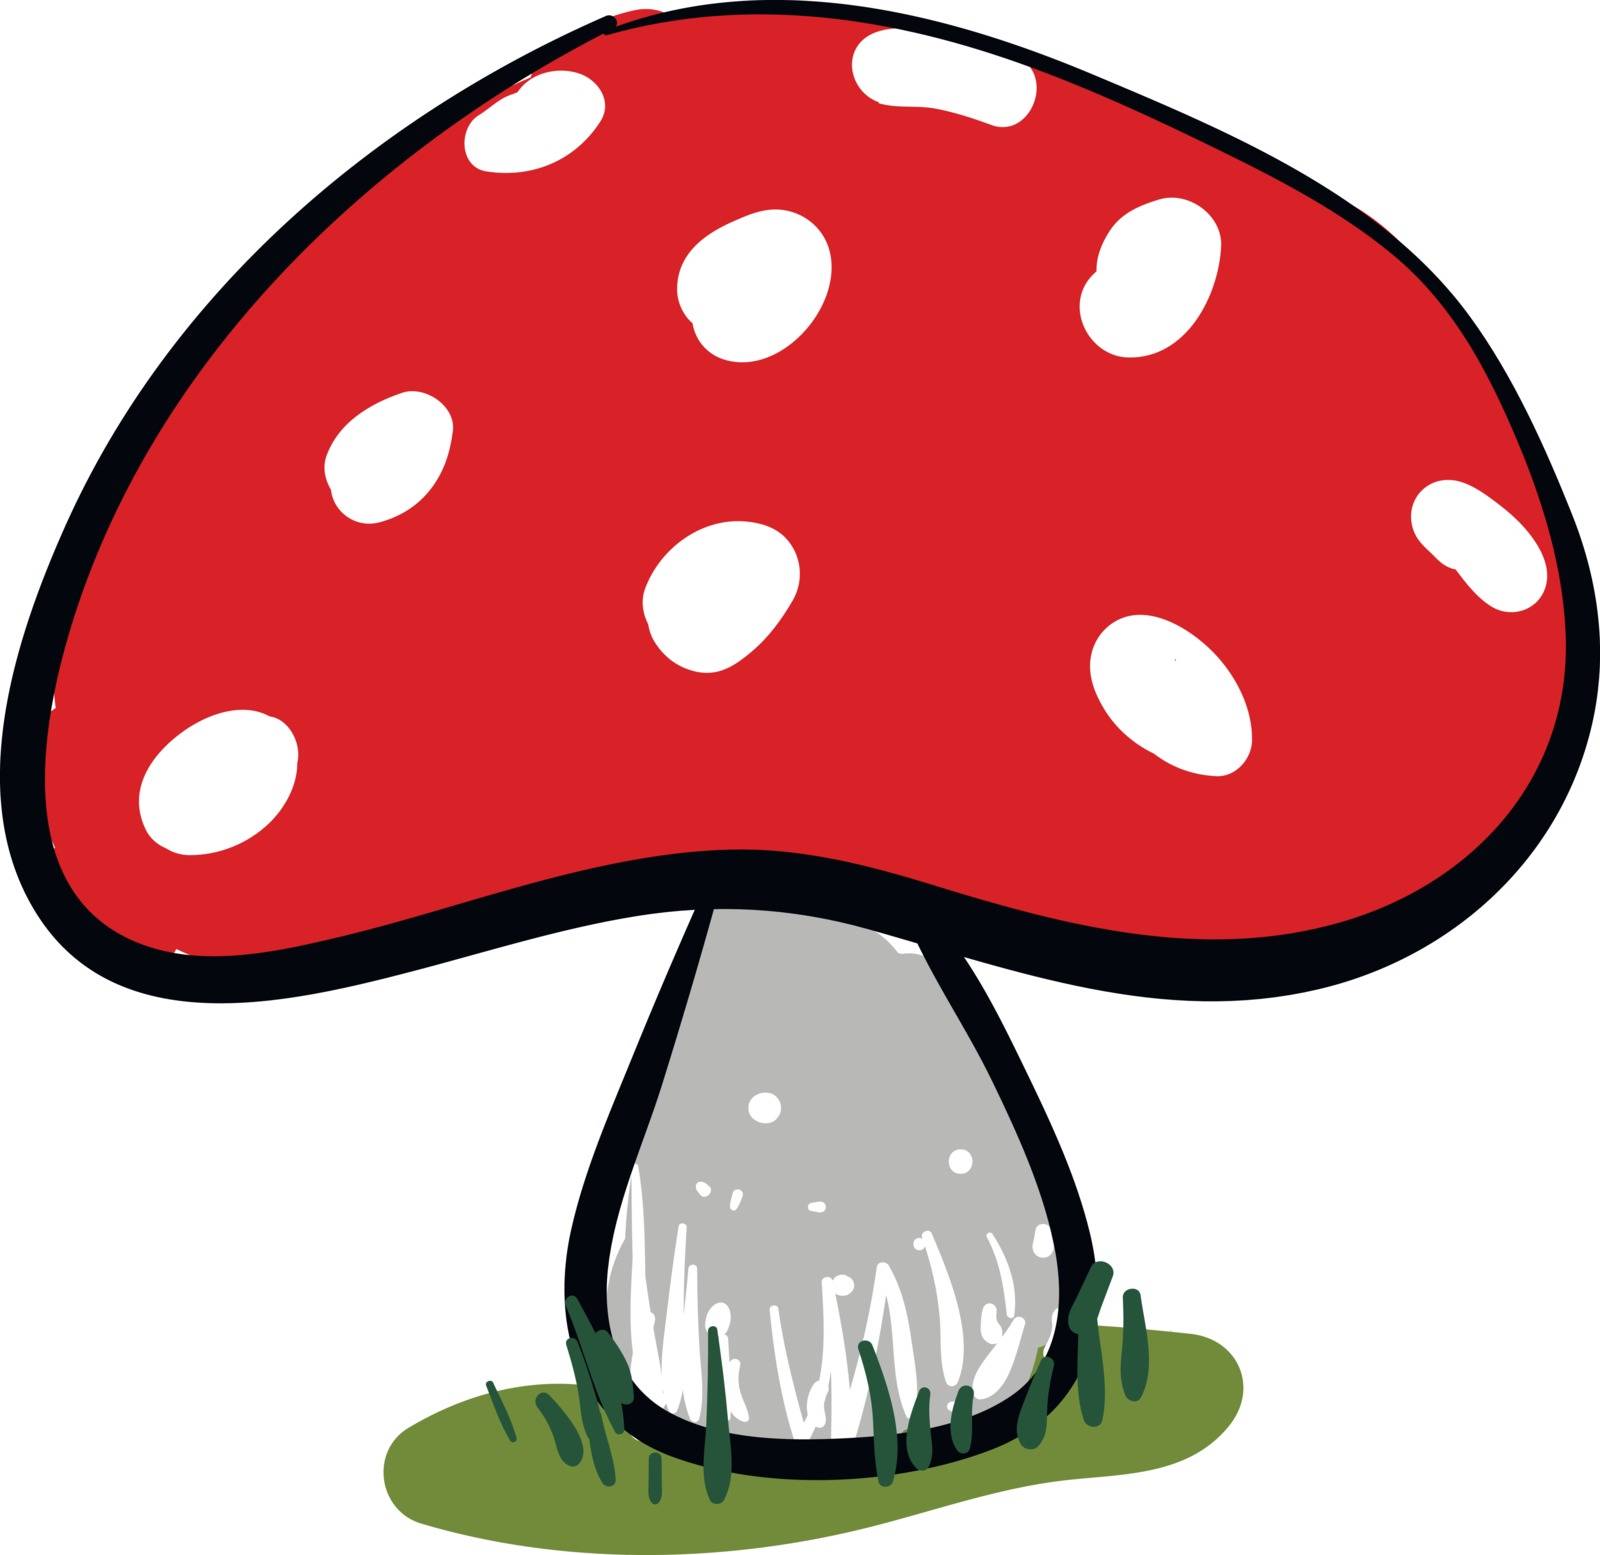 Clipart of a mushroom with white spherical spheres on the red cap and grey stem grown above the green grasslands  vector  color drawing or illustration